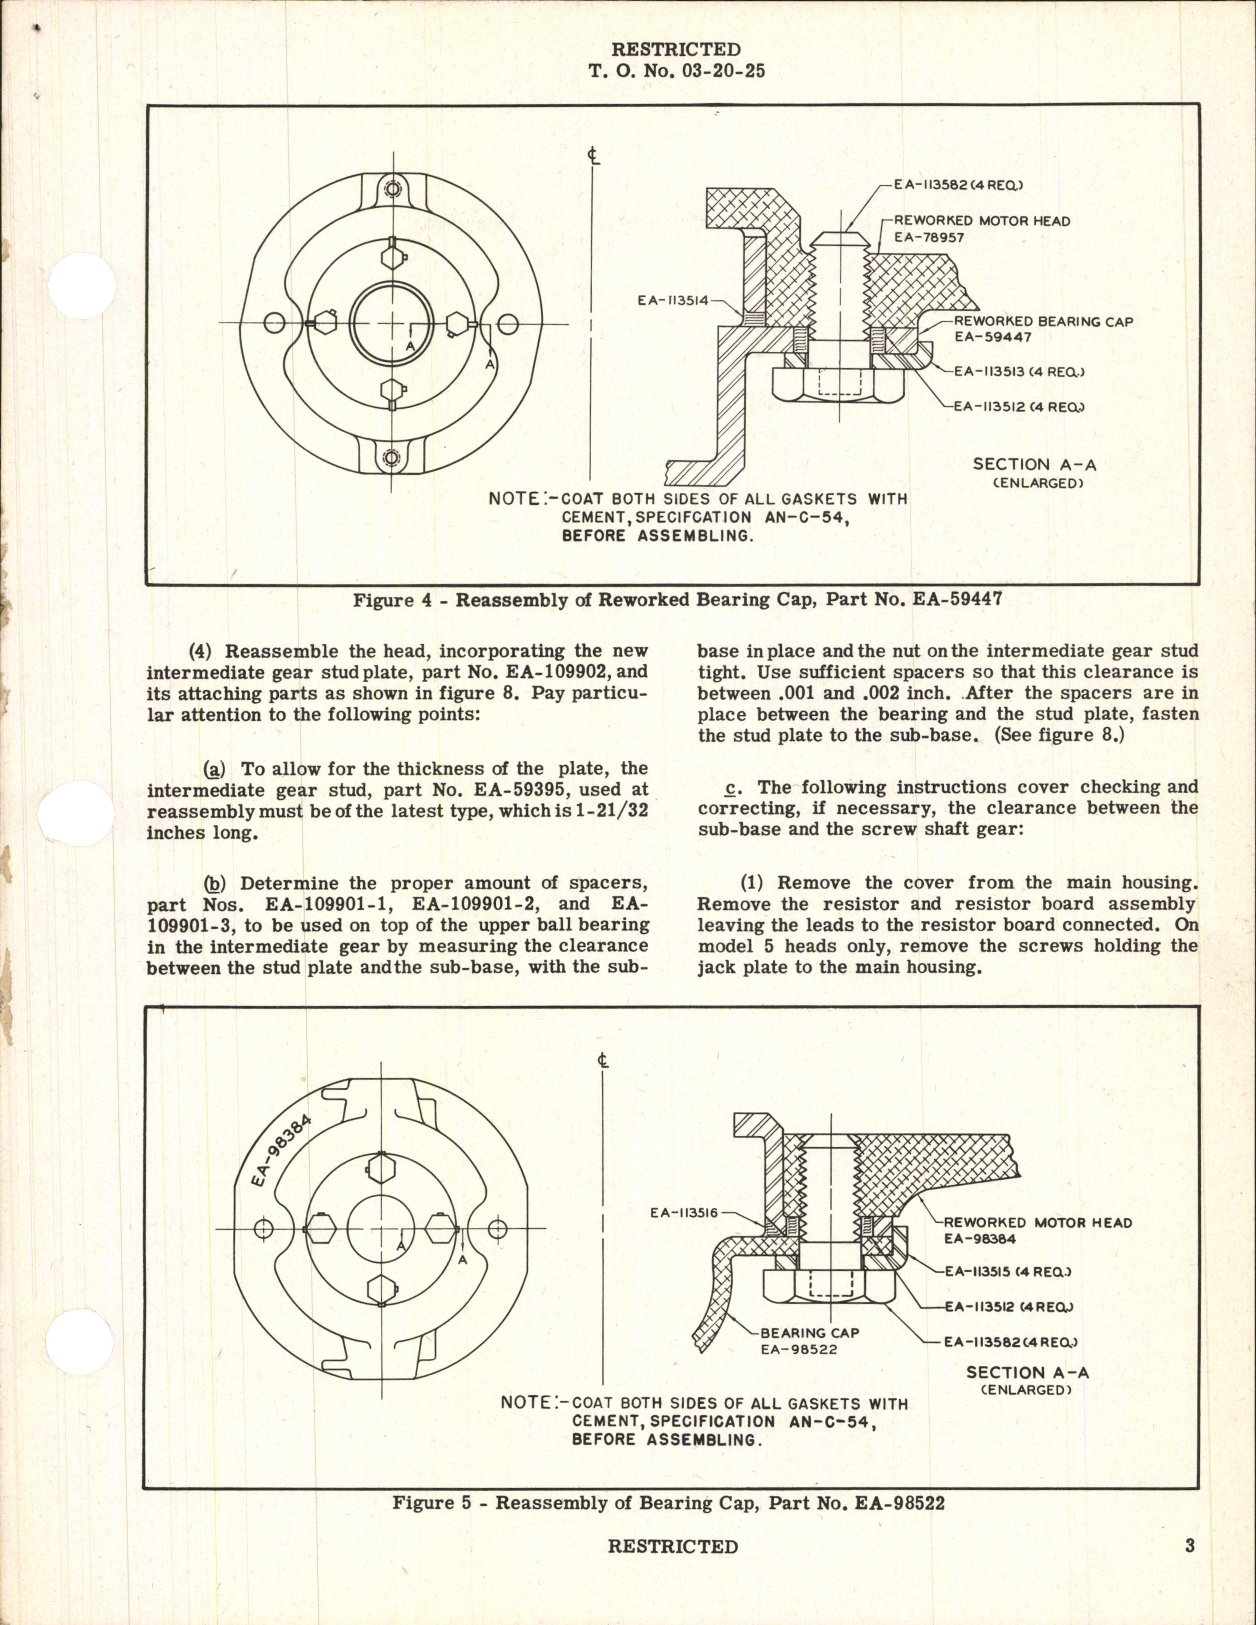 Sample page  3 from AirCorps Library document: Propellers and Accessories; Modification of Electric Governor Heads